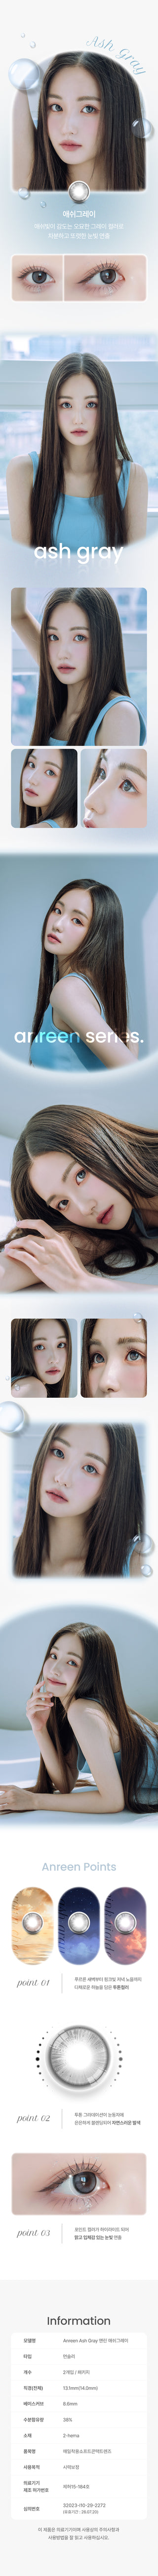 A close-up of a model demonstrating a natural makeup look with Ann365 Anreen Ash Grey circle colour contacts, highlighting how well the contact lenses blend with her dark eyes.